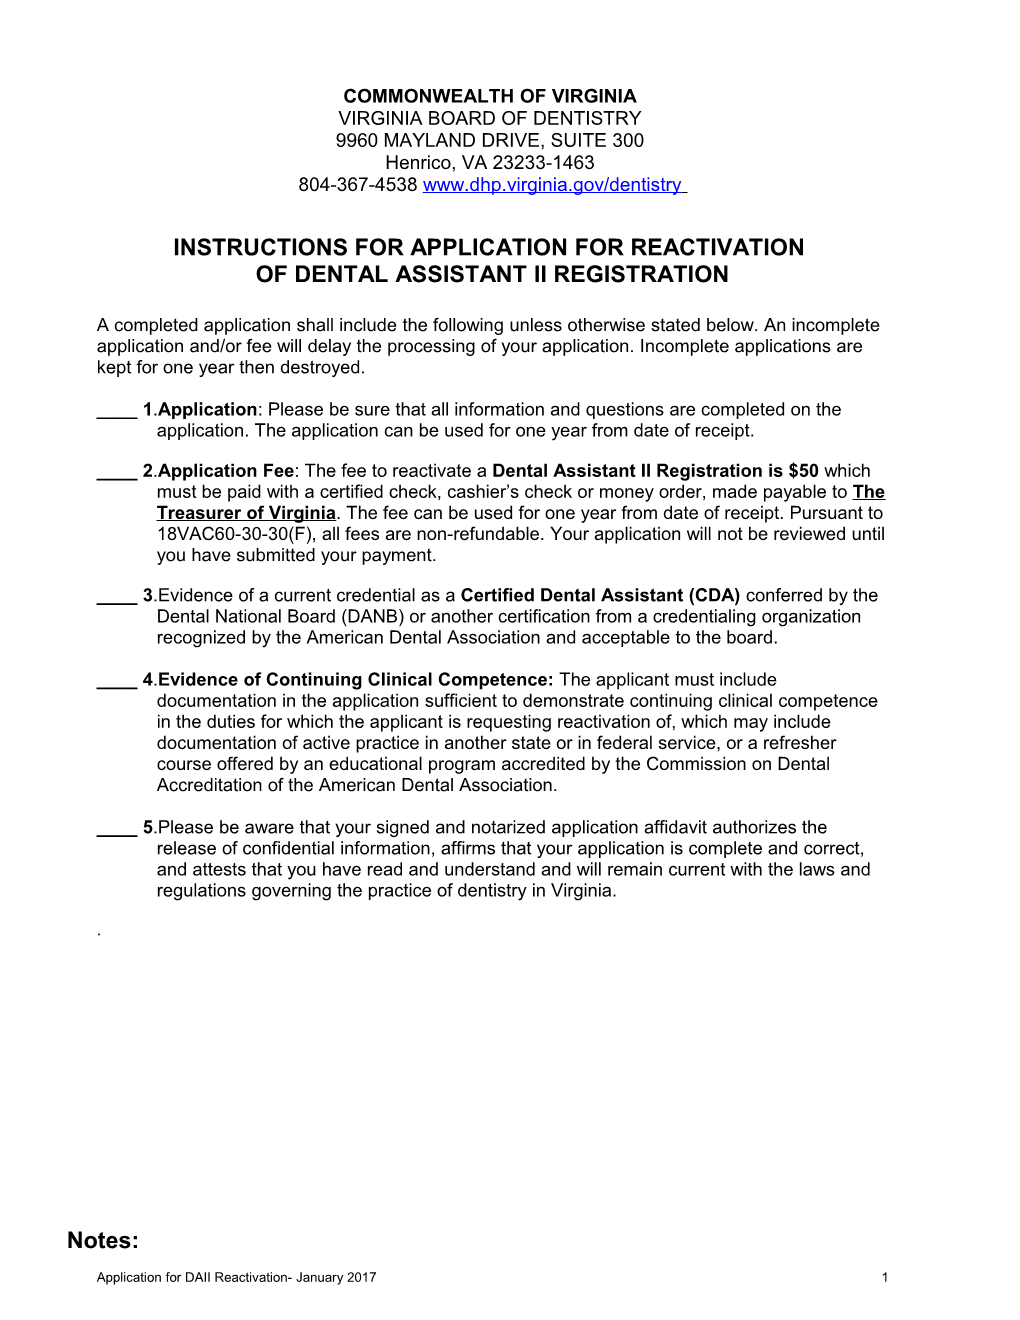 Reactivation Application for Dentists and Dental Hygienists